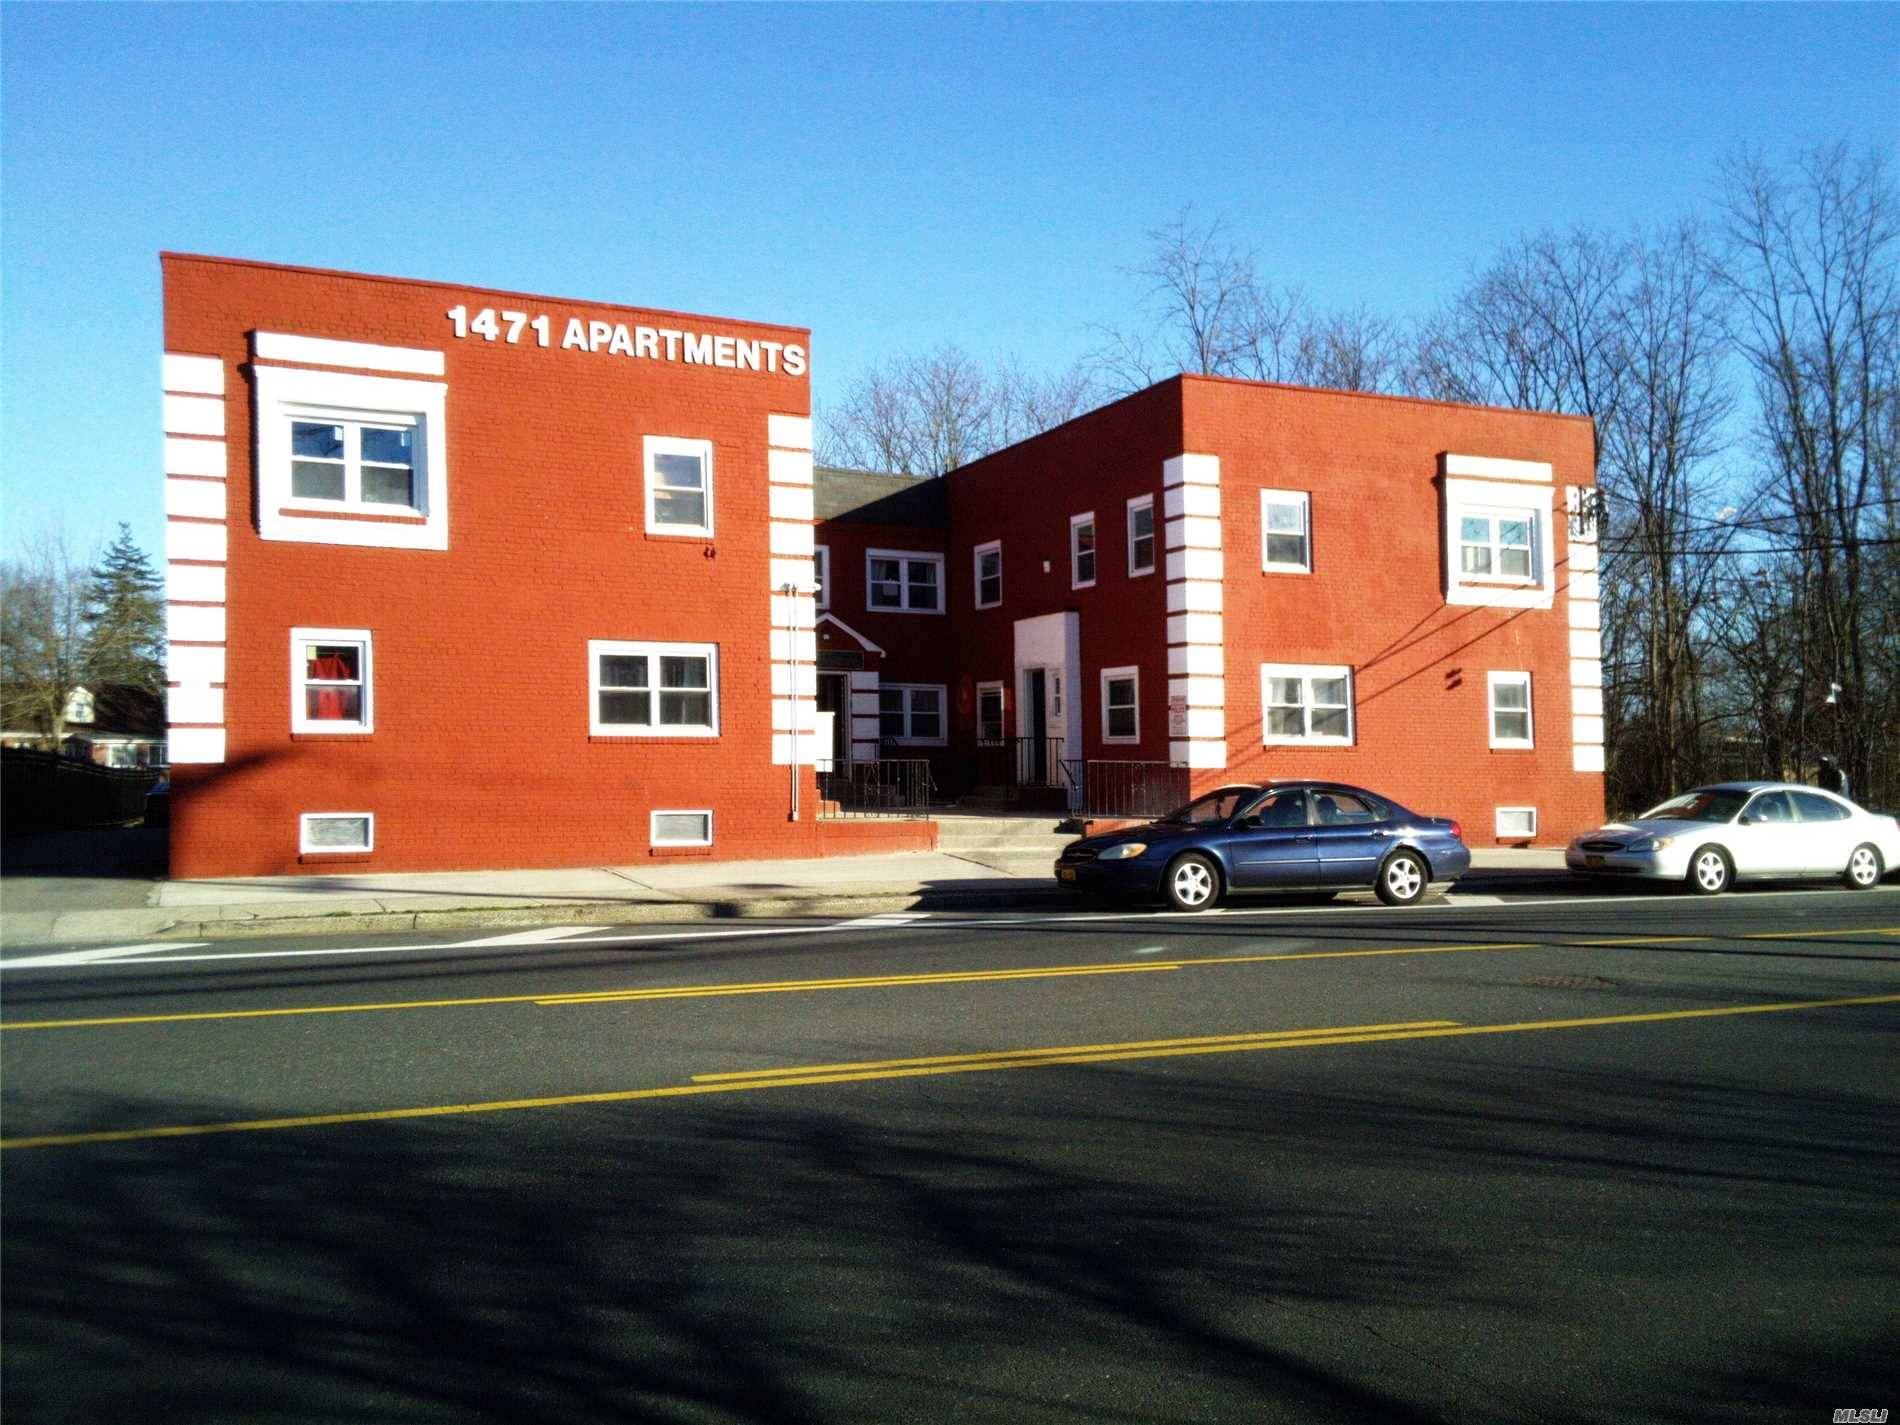 Great  2 Story, 8 Rental Units, Apartment Building With A 8.